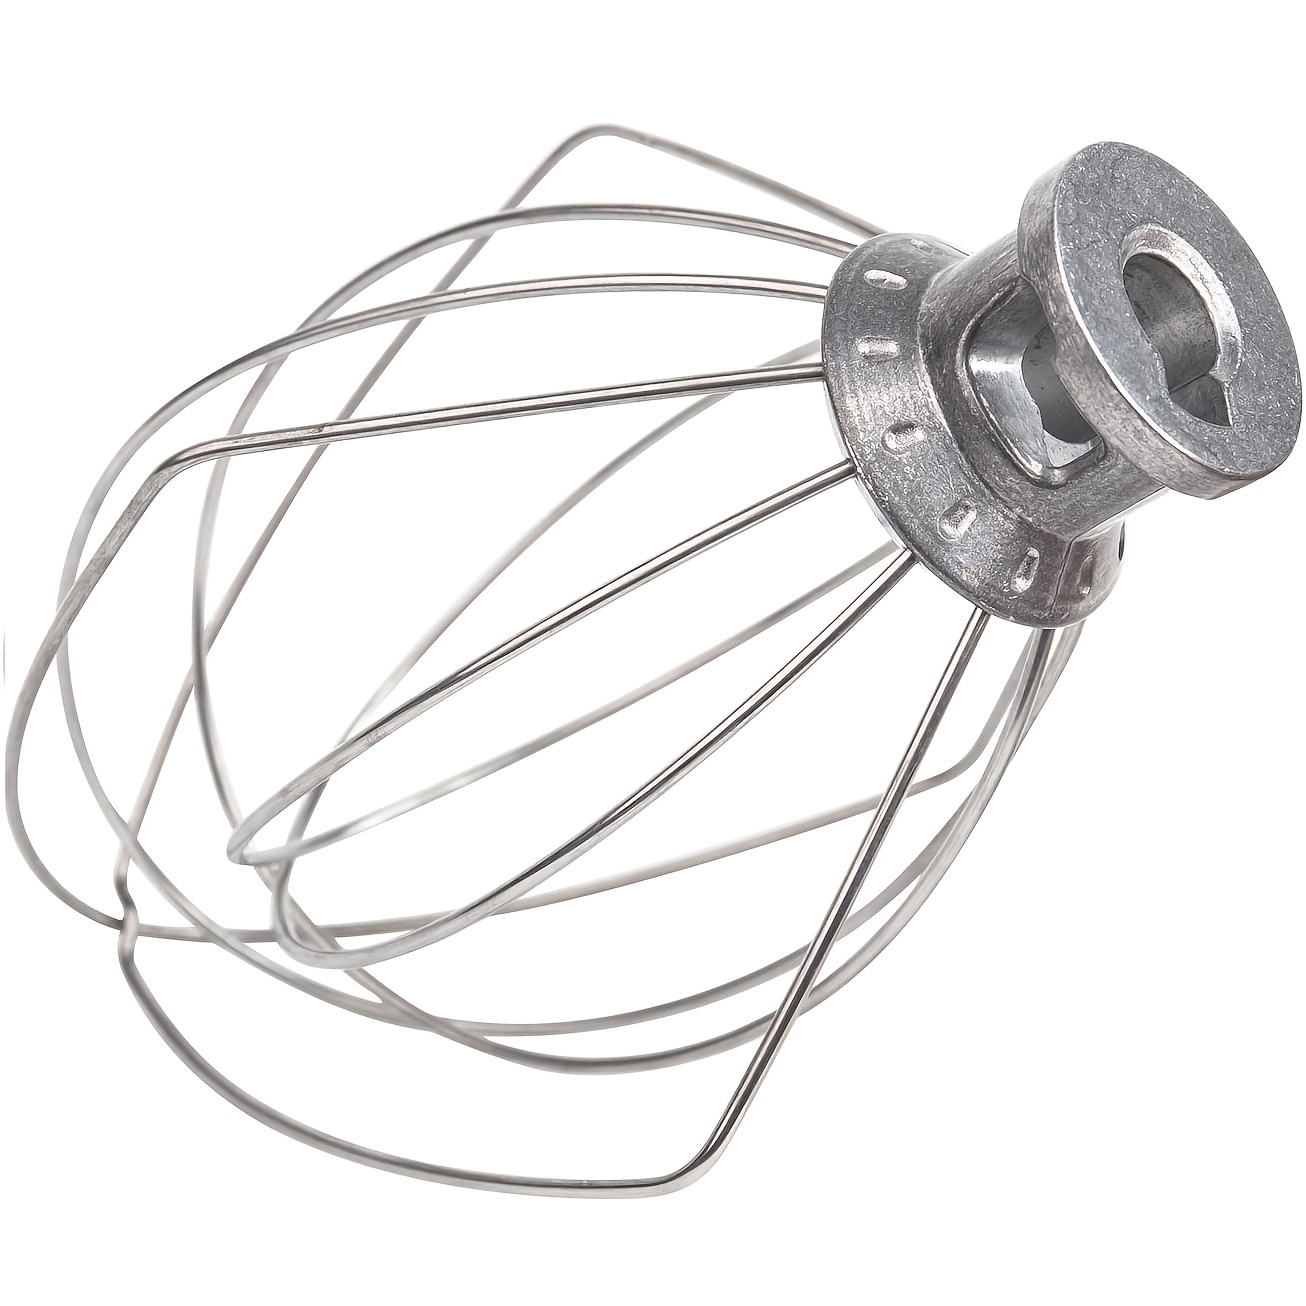 K45WW 6-Wire Whip Attachment for KitchenAid 4.5 Quart Tilt-Head Stand Mixer  Stainless Steel Whisk for Kitchen Aid Mixer Accessory Replacement Parts